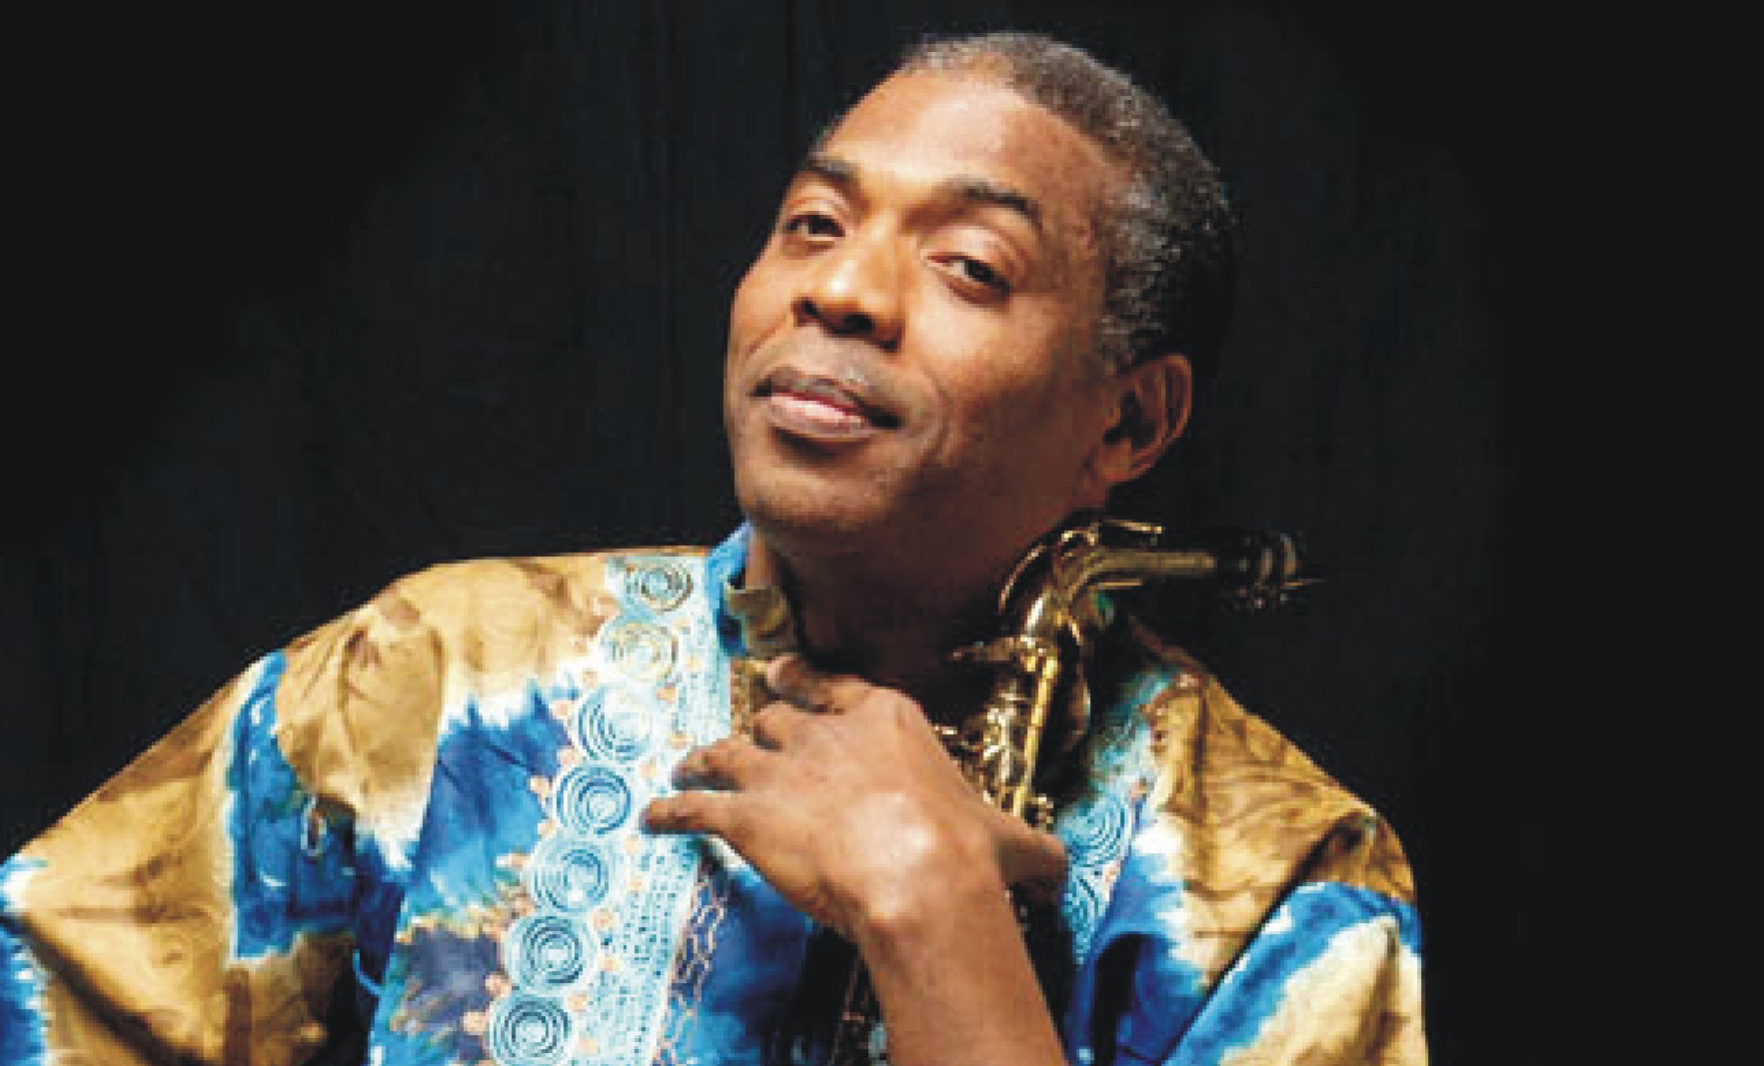 'We Pay Our Taxes So The Police Must Defend Us' - Femi Kuti On Police Brutality